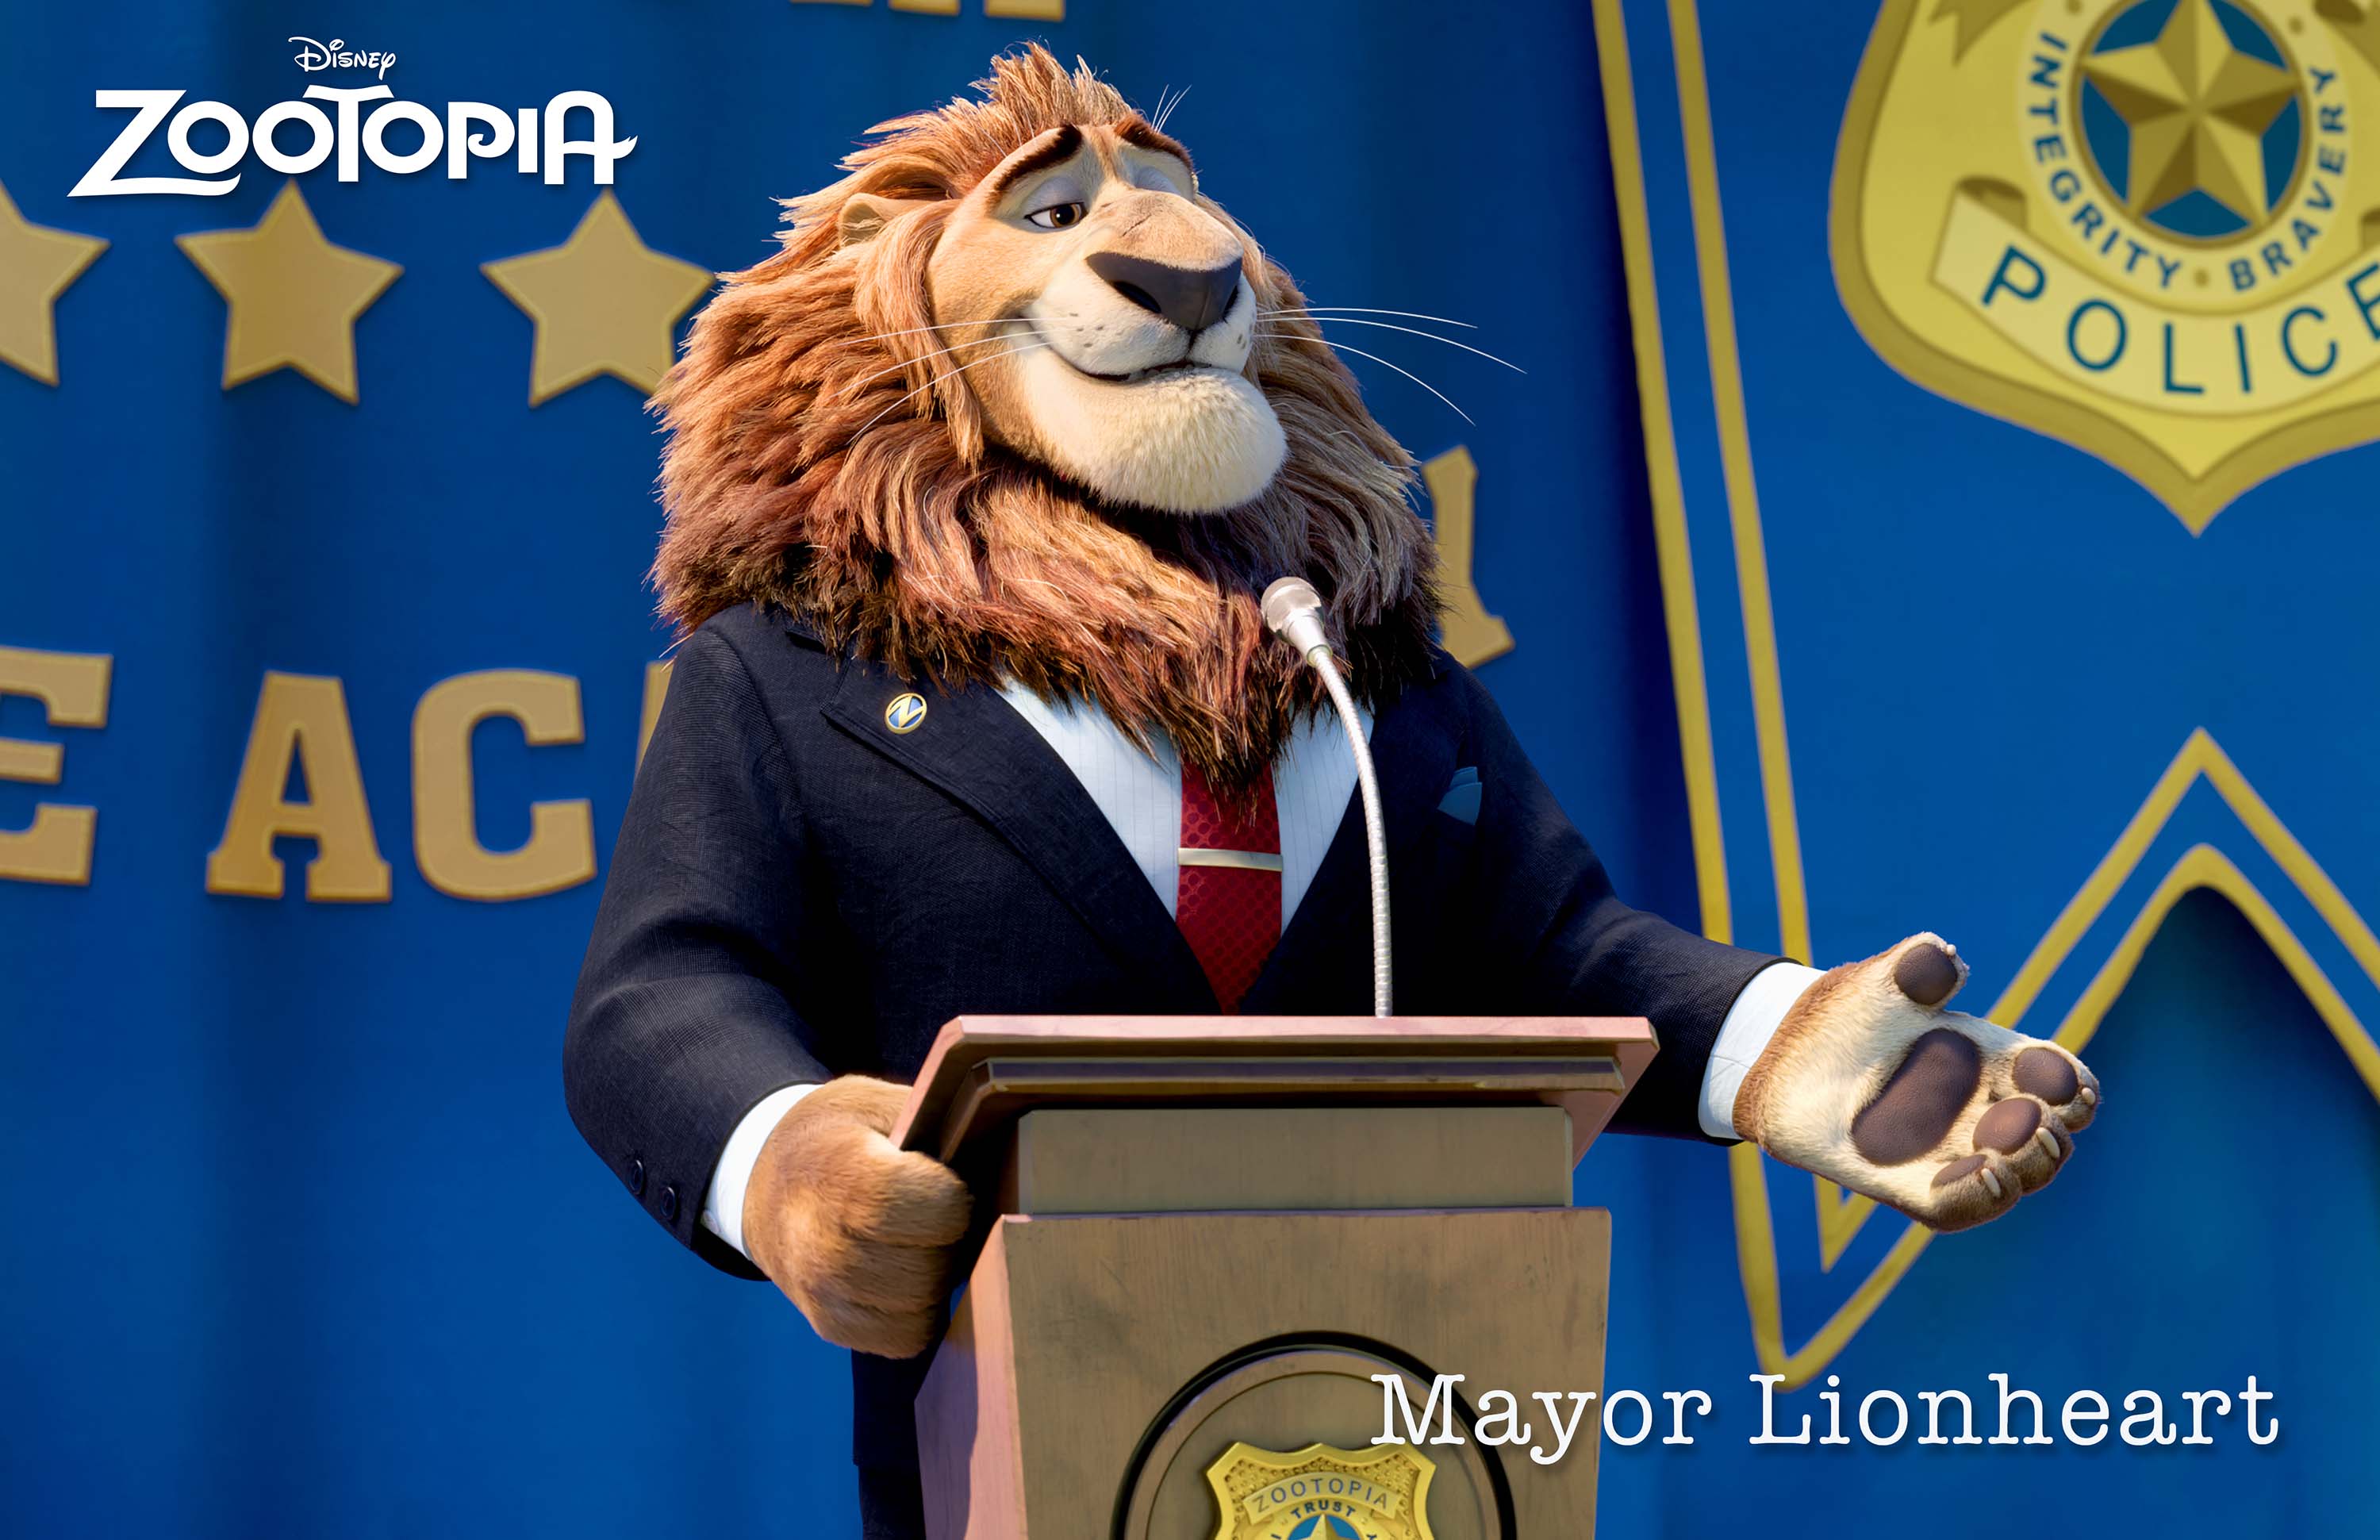 ZOOTOPIA â€“ MAYOR LEODORE LIONHEART, the noble leader of Zootopia, who coined the city’s mantra that Judy Hopps lives by: “In Zootopia, anyone can be anything." Â©2015 Disney. All Rights Reserved.